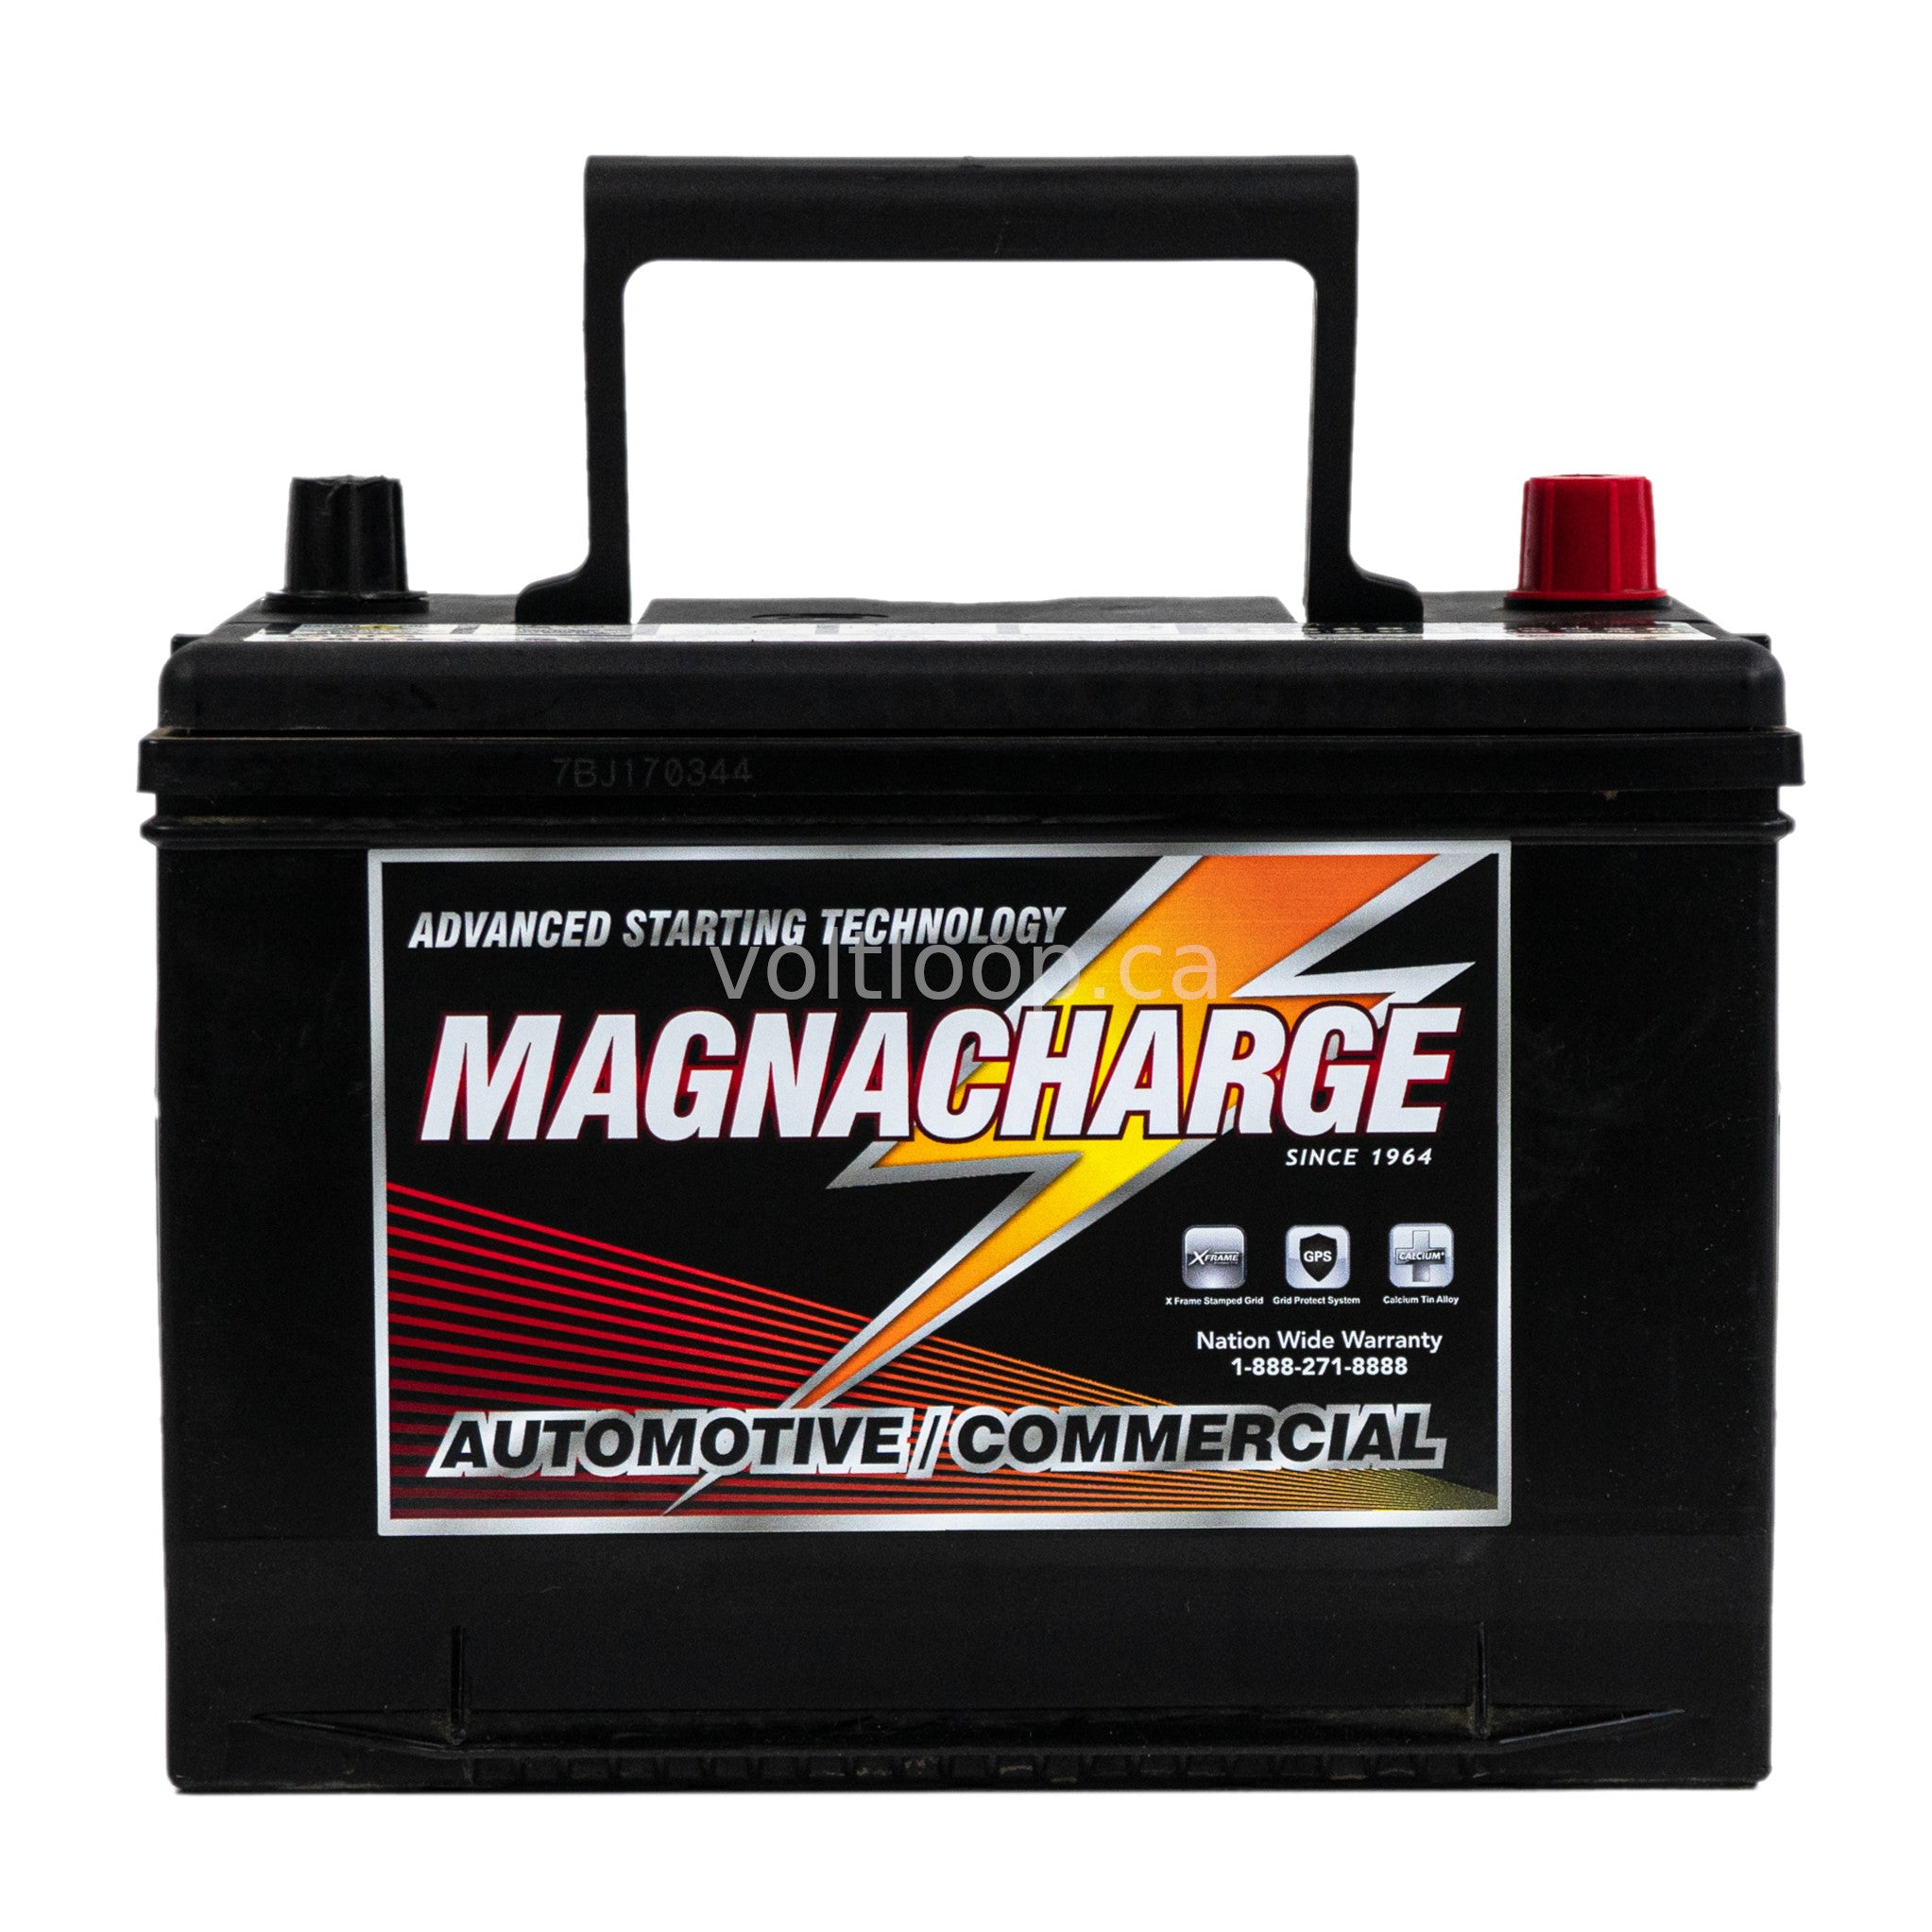 Magnacharge 78DT-625 Group 34/78 Car Battery